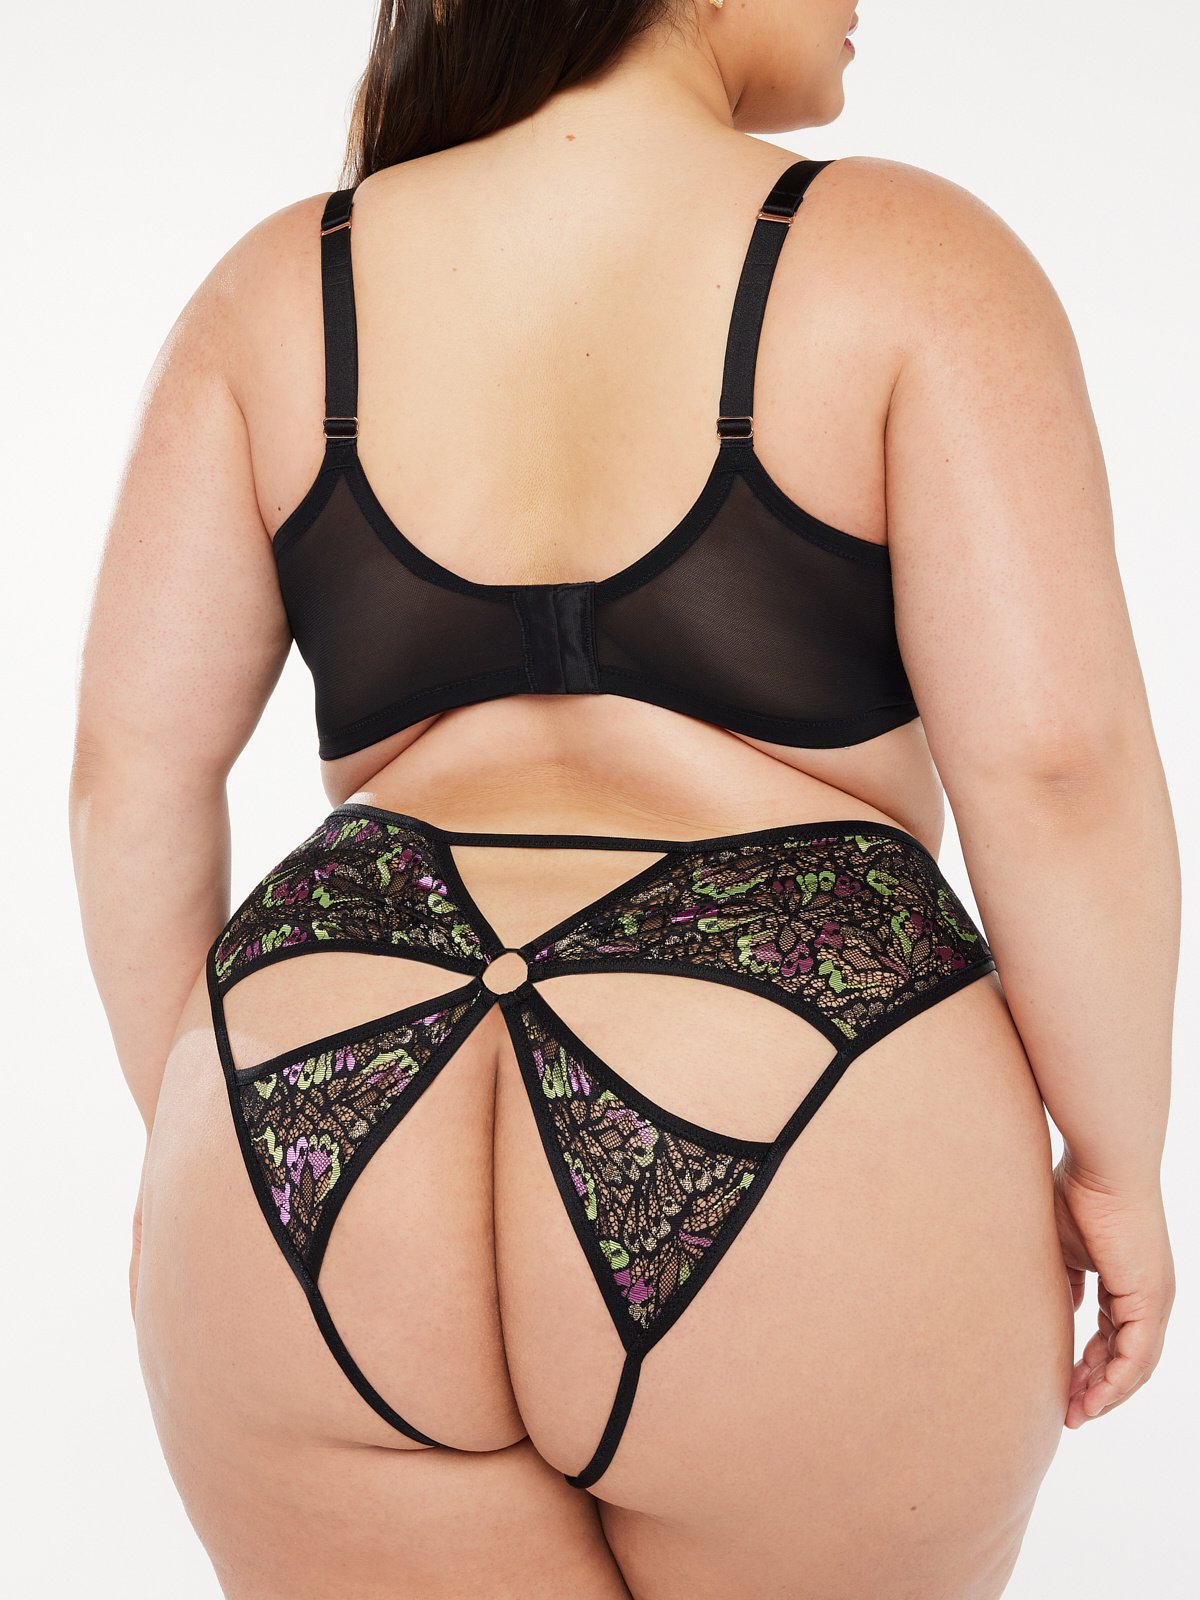 https://cdn.savagex.com/media/images/products/UD2252298-10785/BUTTERFLY-WINGS-LACE-AND-MESH-CROTCHLESS-PANTY-UD2252298-10785-1-1200x1600.jpg